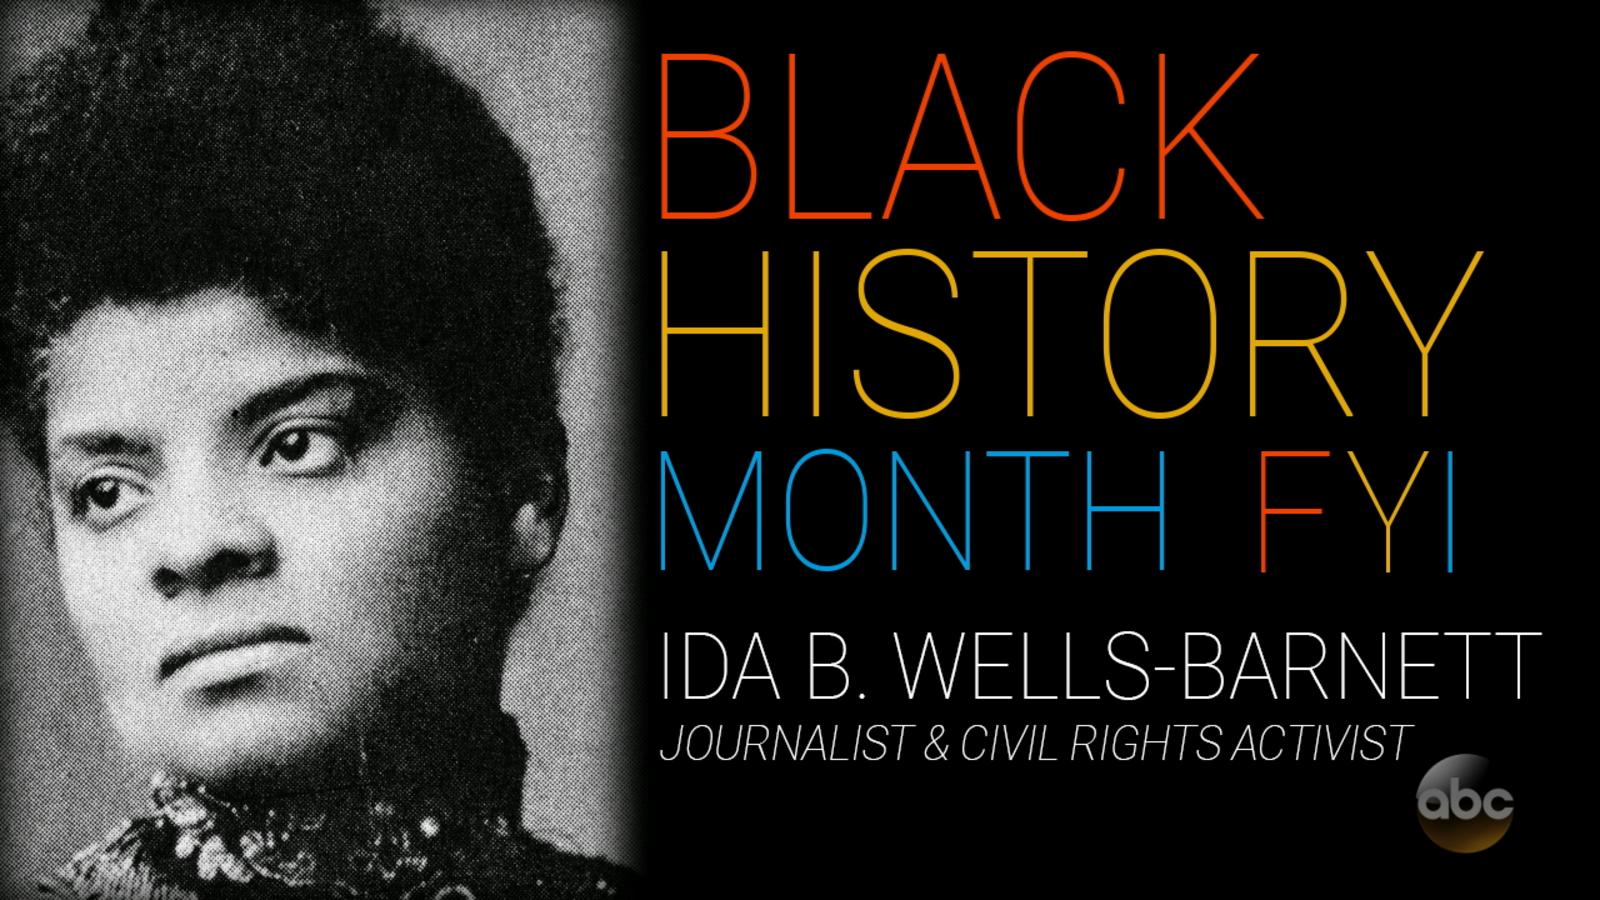 Black History Month Videos at ABC News Video Archive at abcnews.com